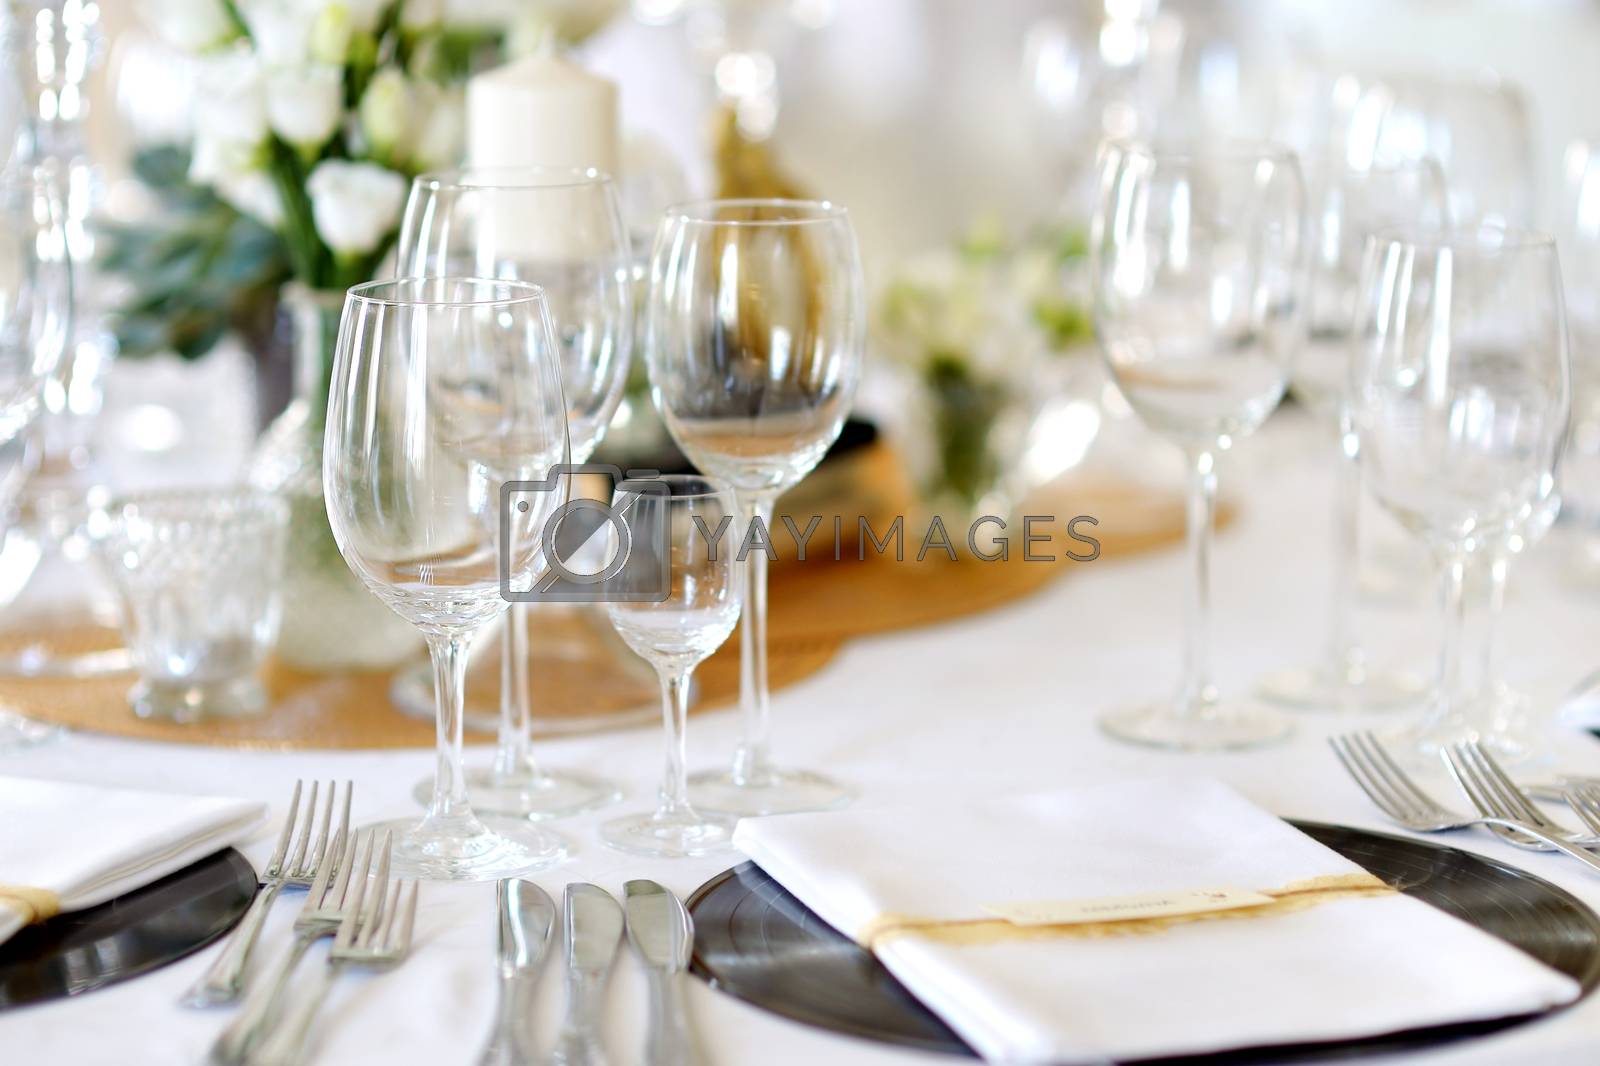 Royalty free image of Table set for an event party or wedding reception by maximkabb